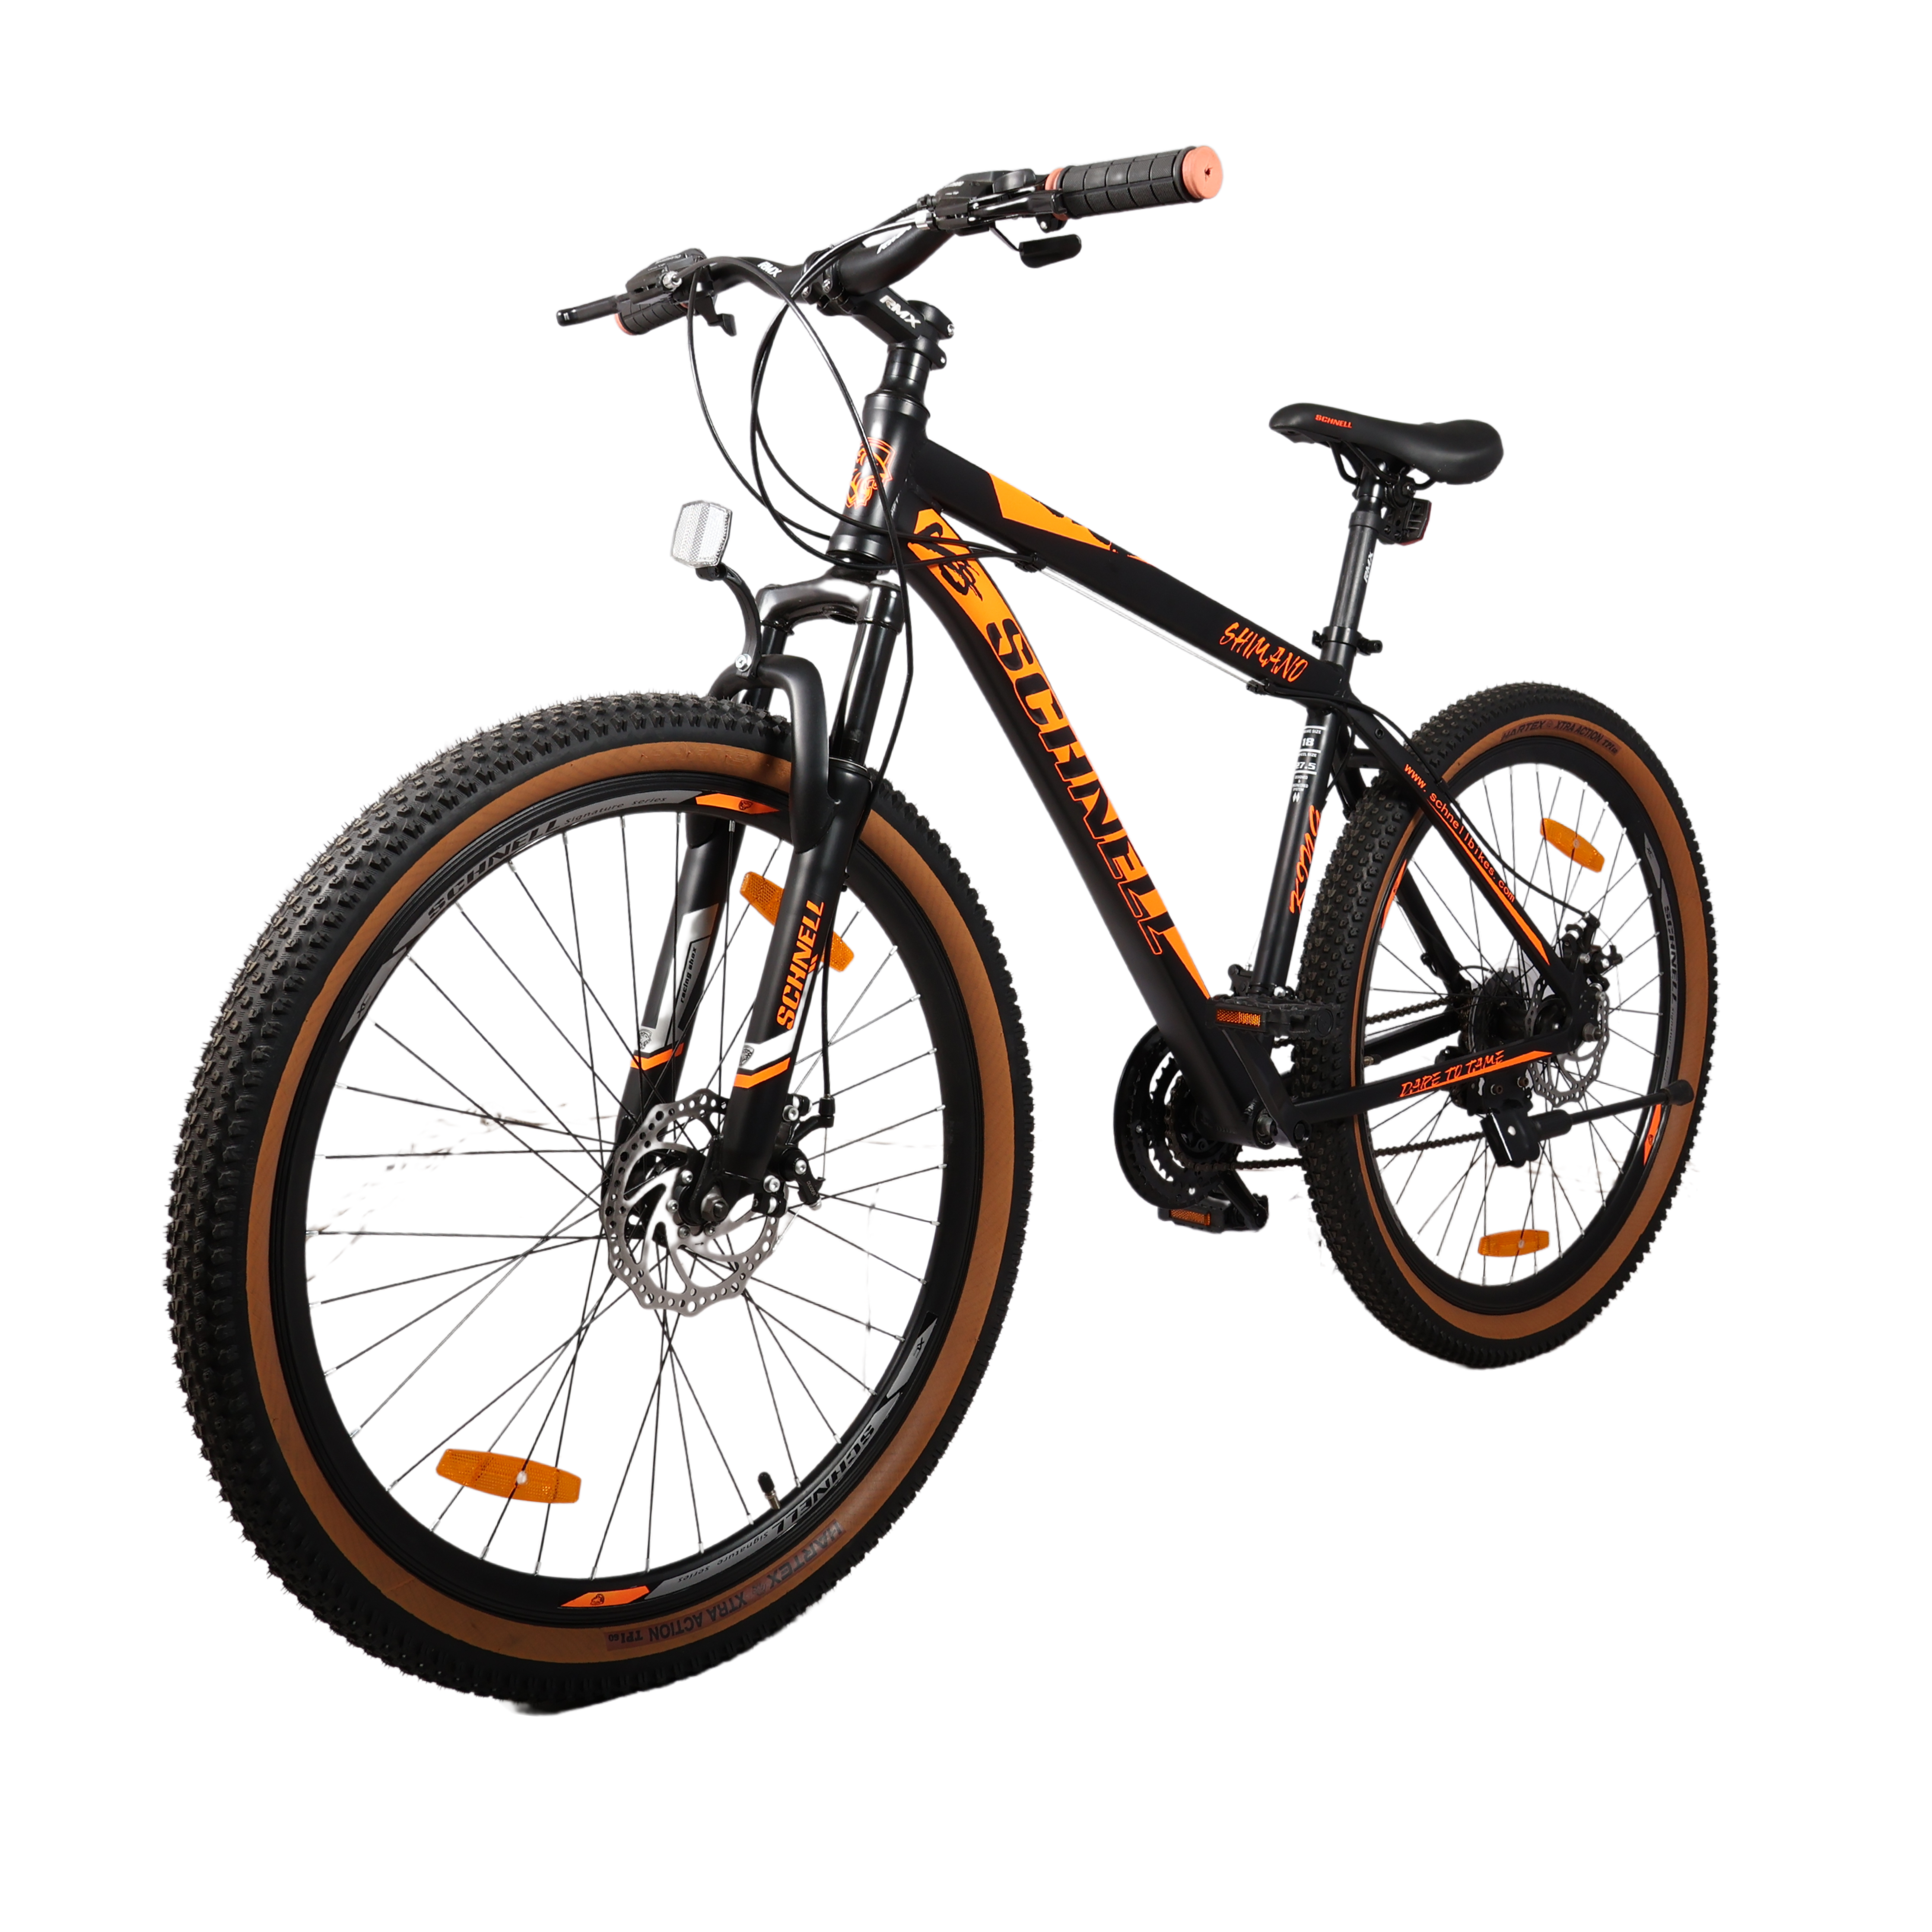 SCHNELL KING 27.5 MS (BLACK)